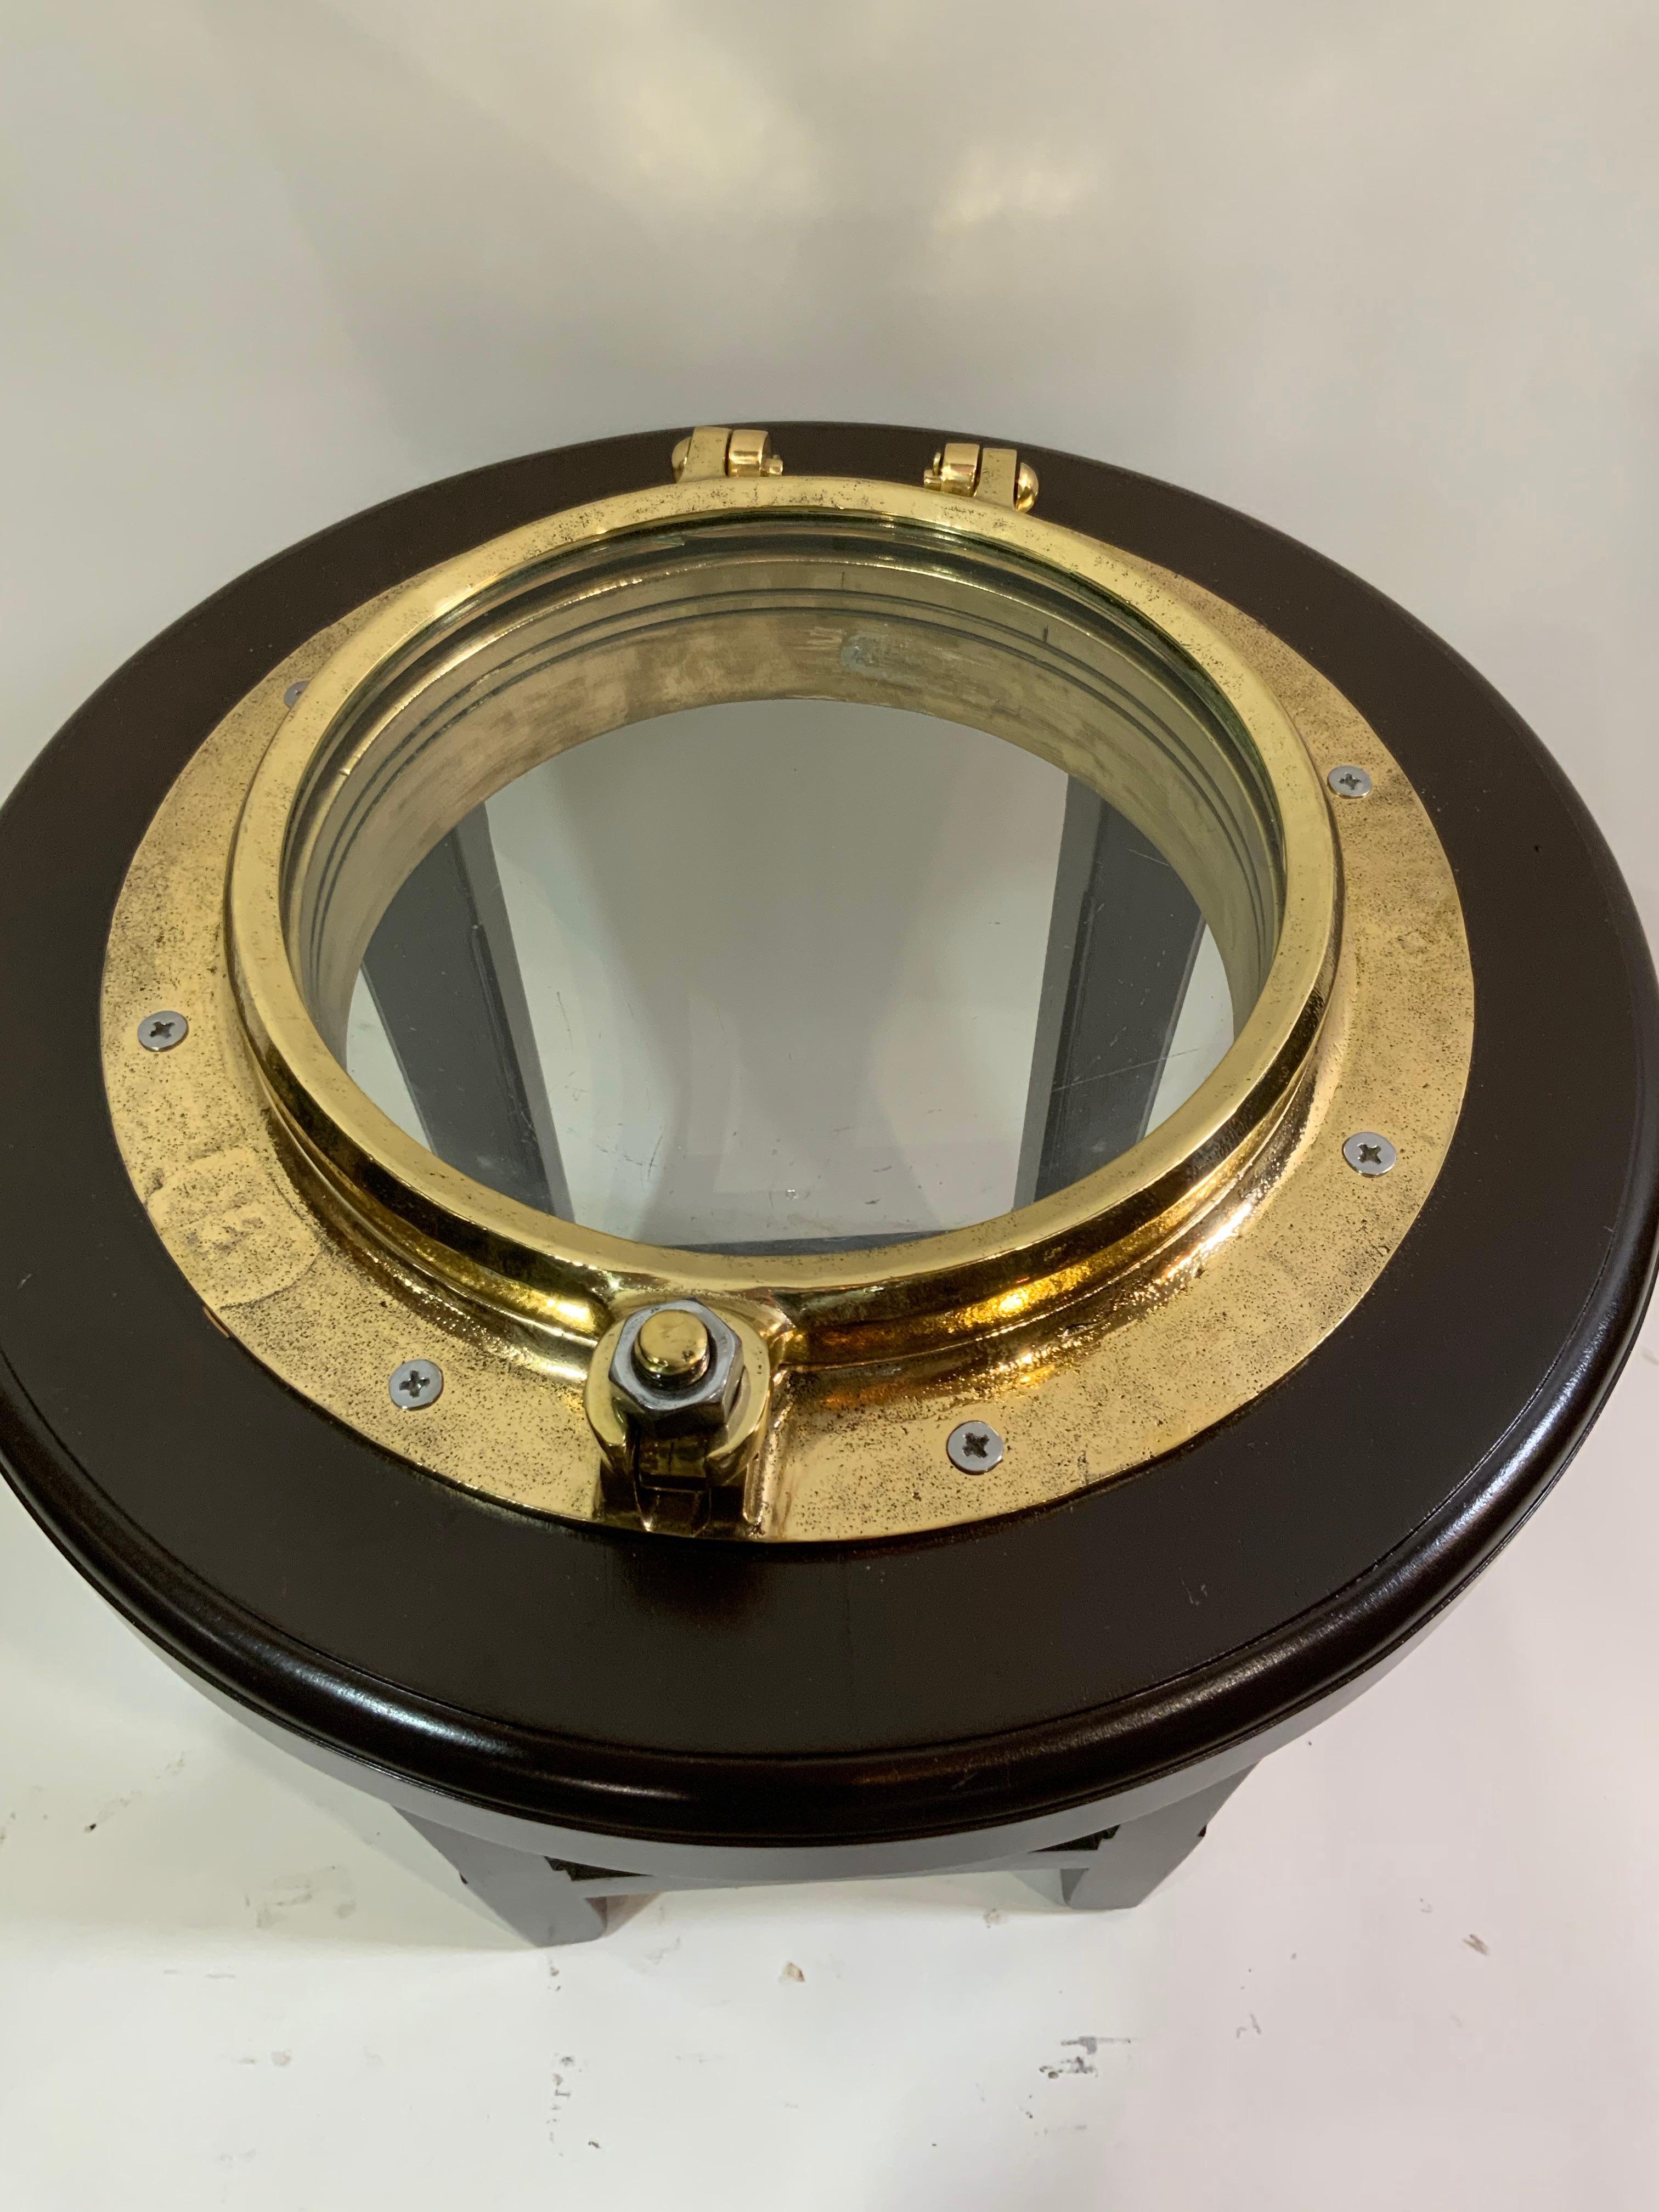 Solid Brass Ships Porthole Made into a Table In Excellent Condition For Sale In Norwell, MA